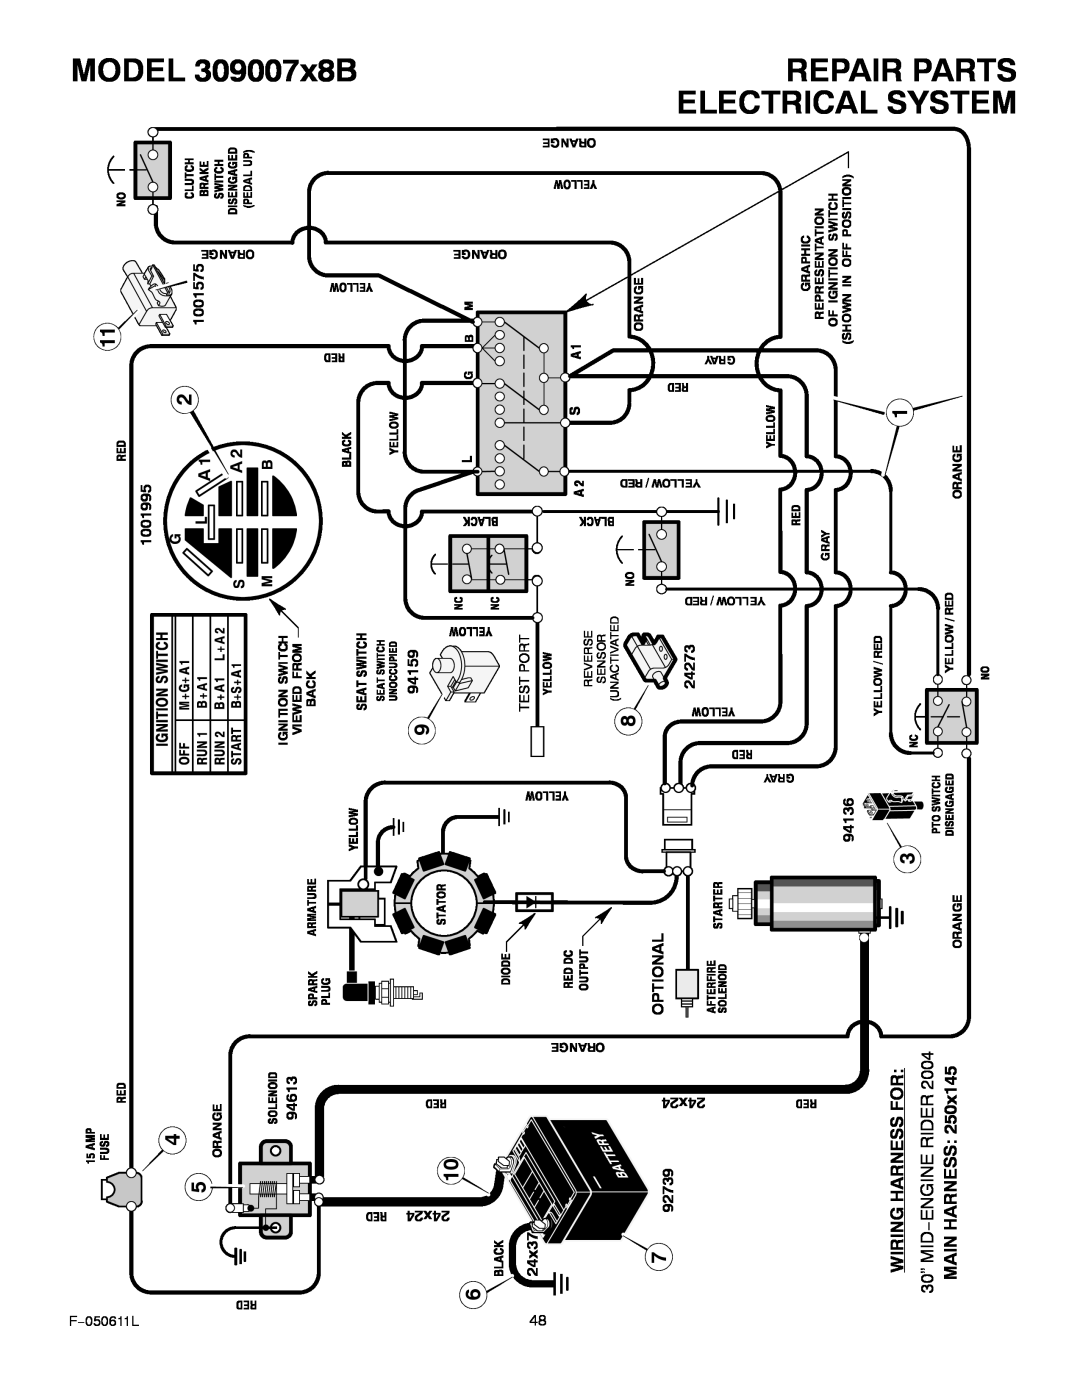 Murray Electrical System, MODEL 309007x8B, Repair Parts, WIRING HARNESS FOR 30” MID−ENGINE RIDER 2004 MAIN HARNESS 